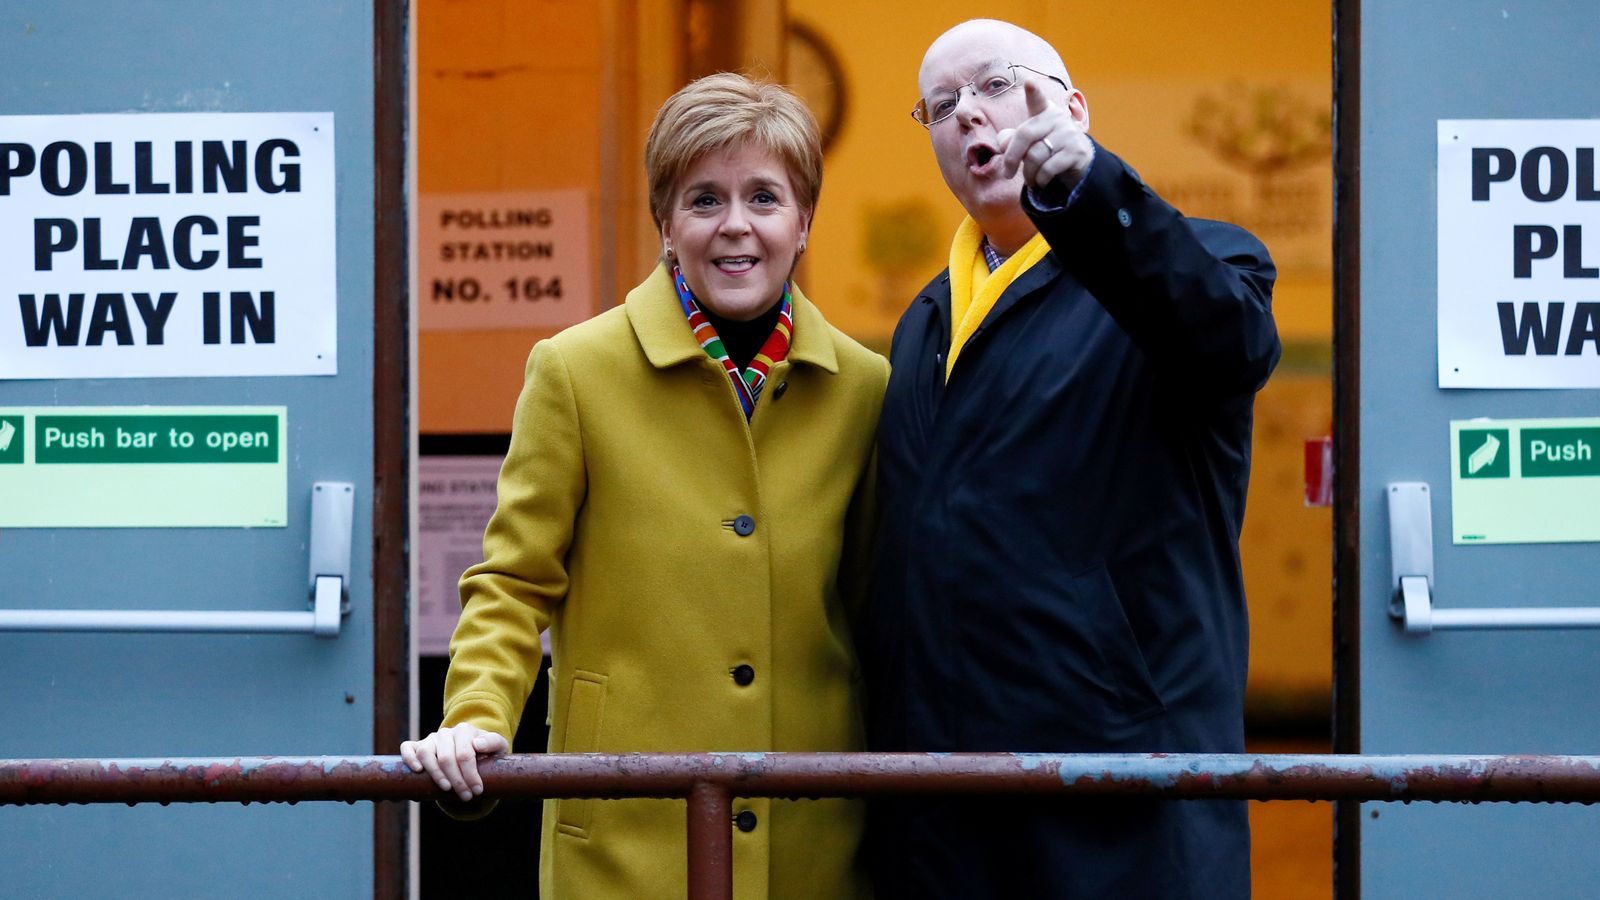 Nicola Sturgeon's husband arrested: What we know so far about Peter Murrell and SNP probe